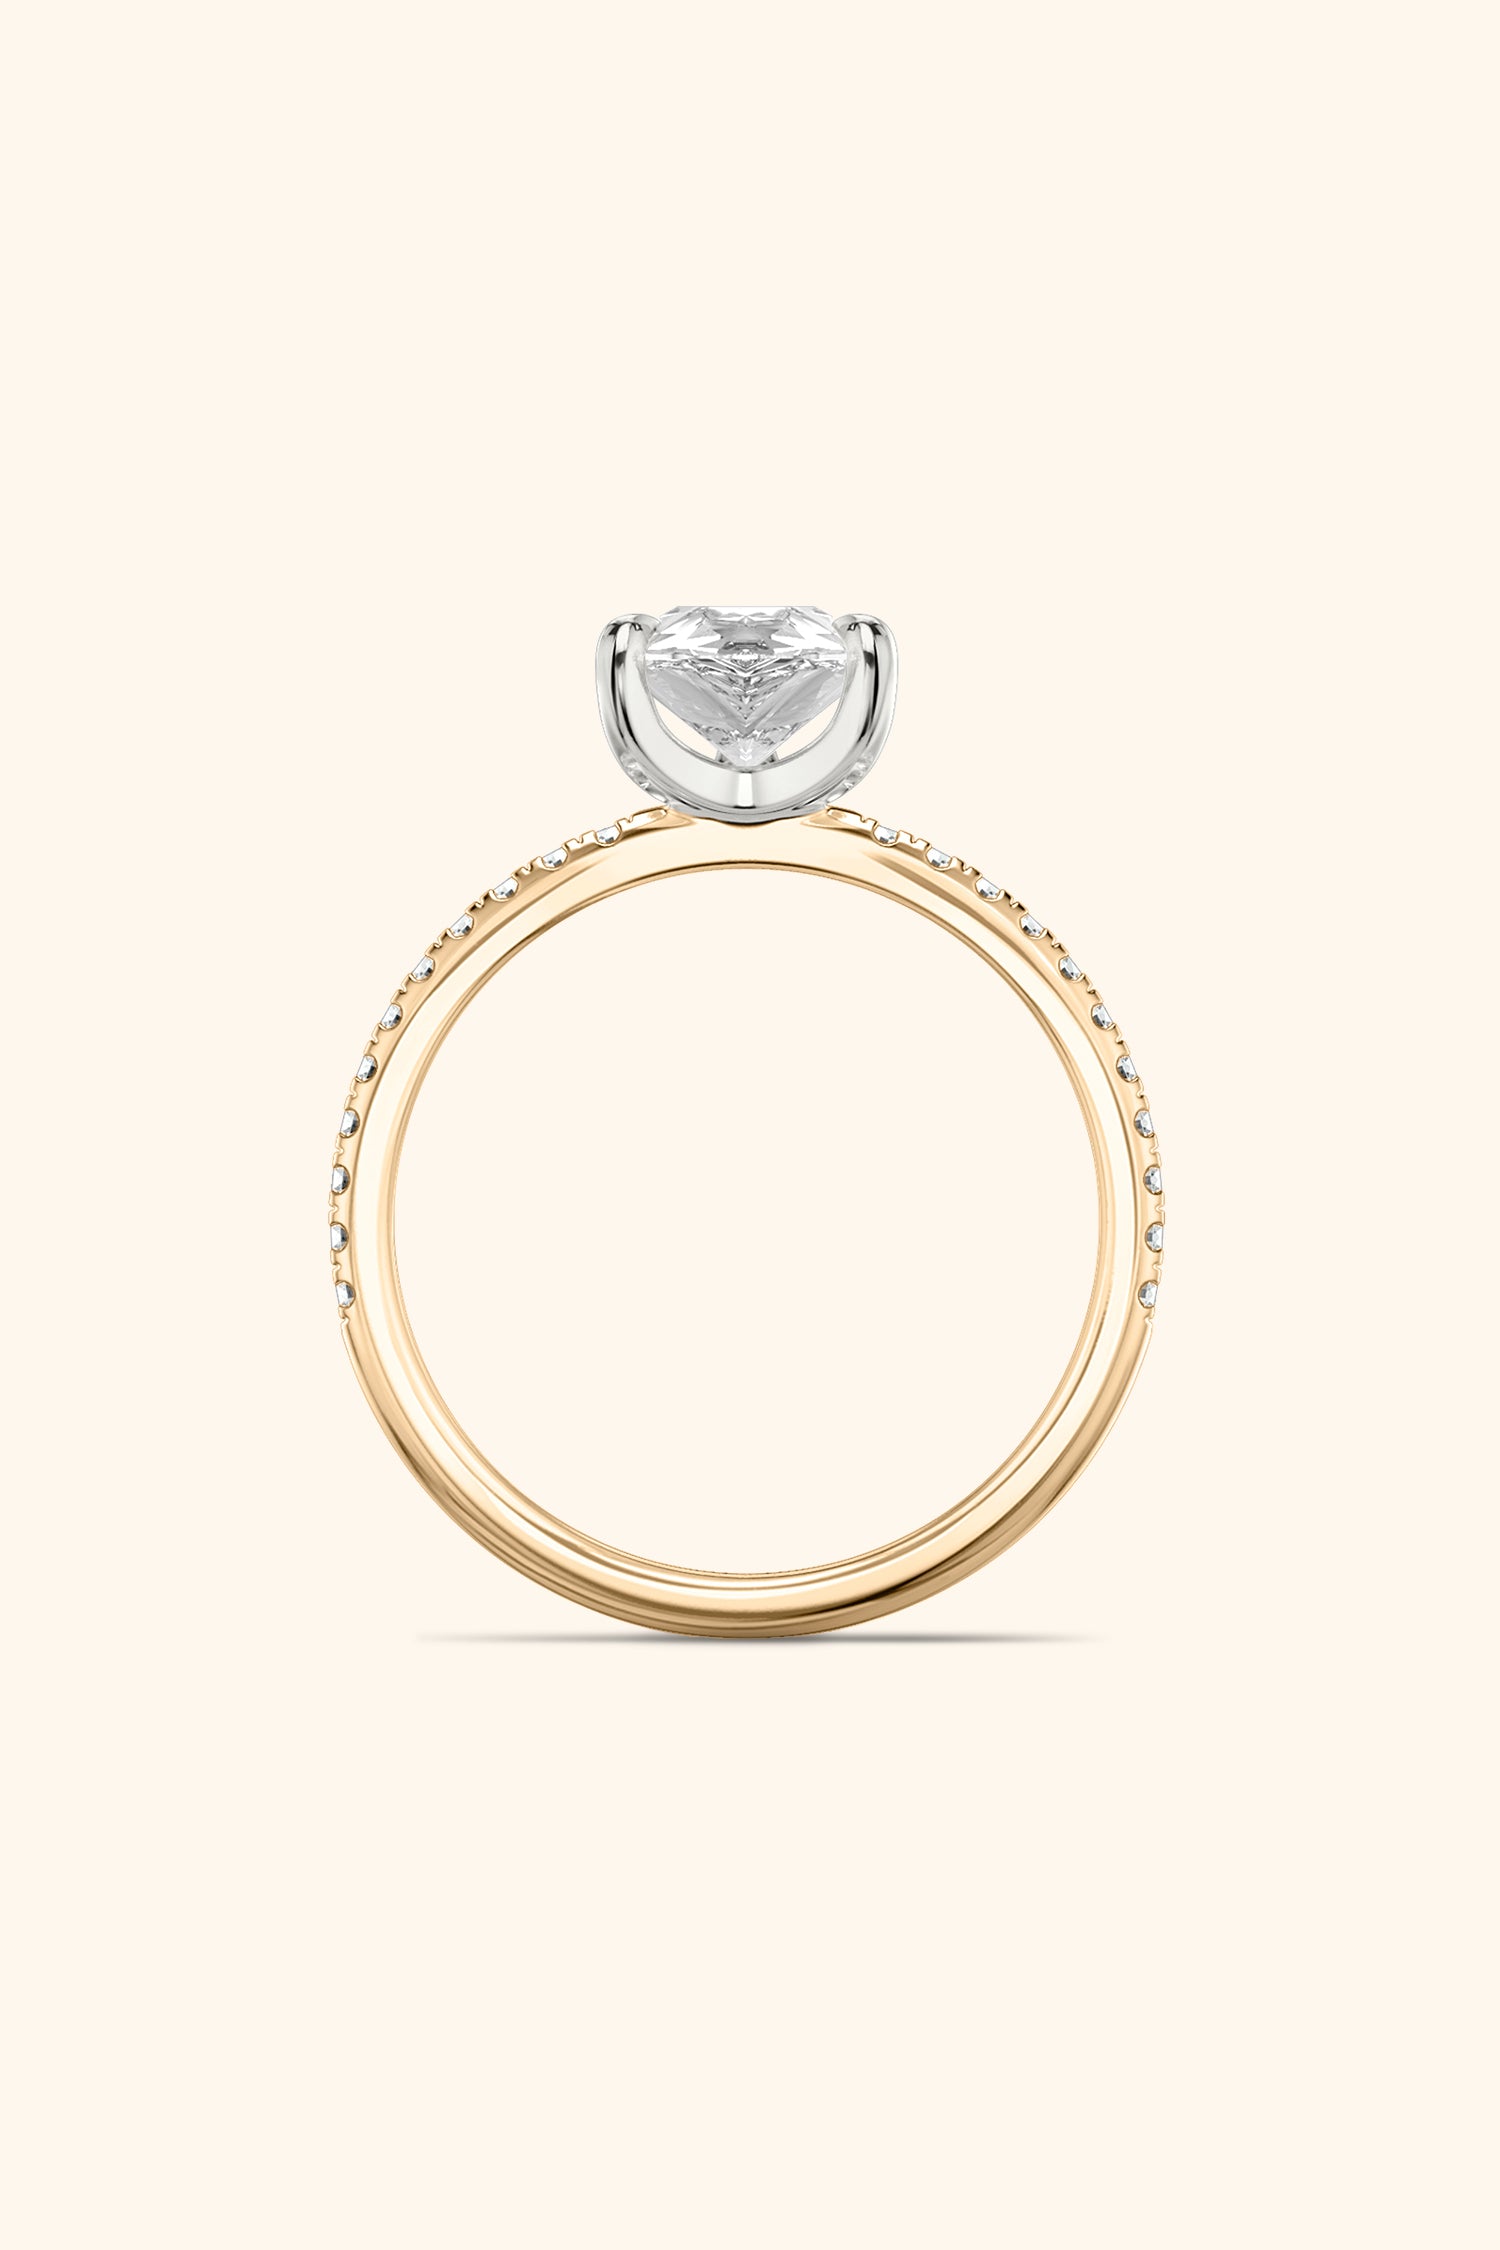 Dual Tone Glance Pavé Ring with 2 Carat Pear Solitaire